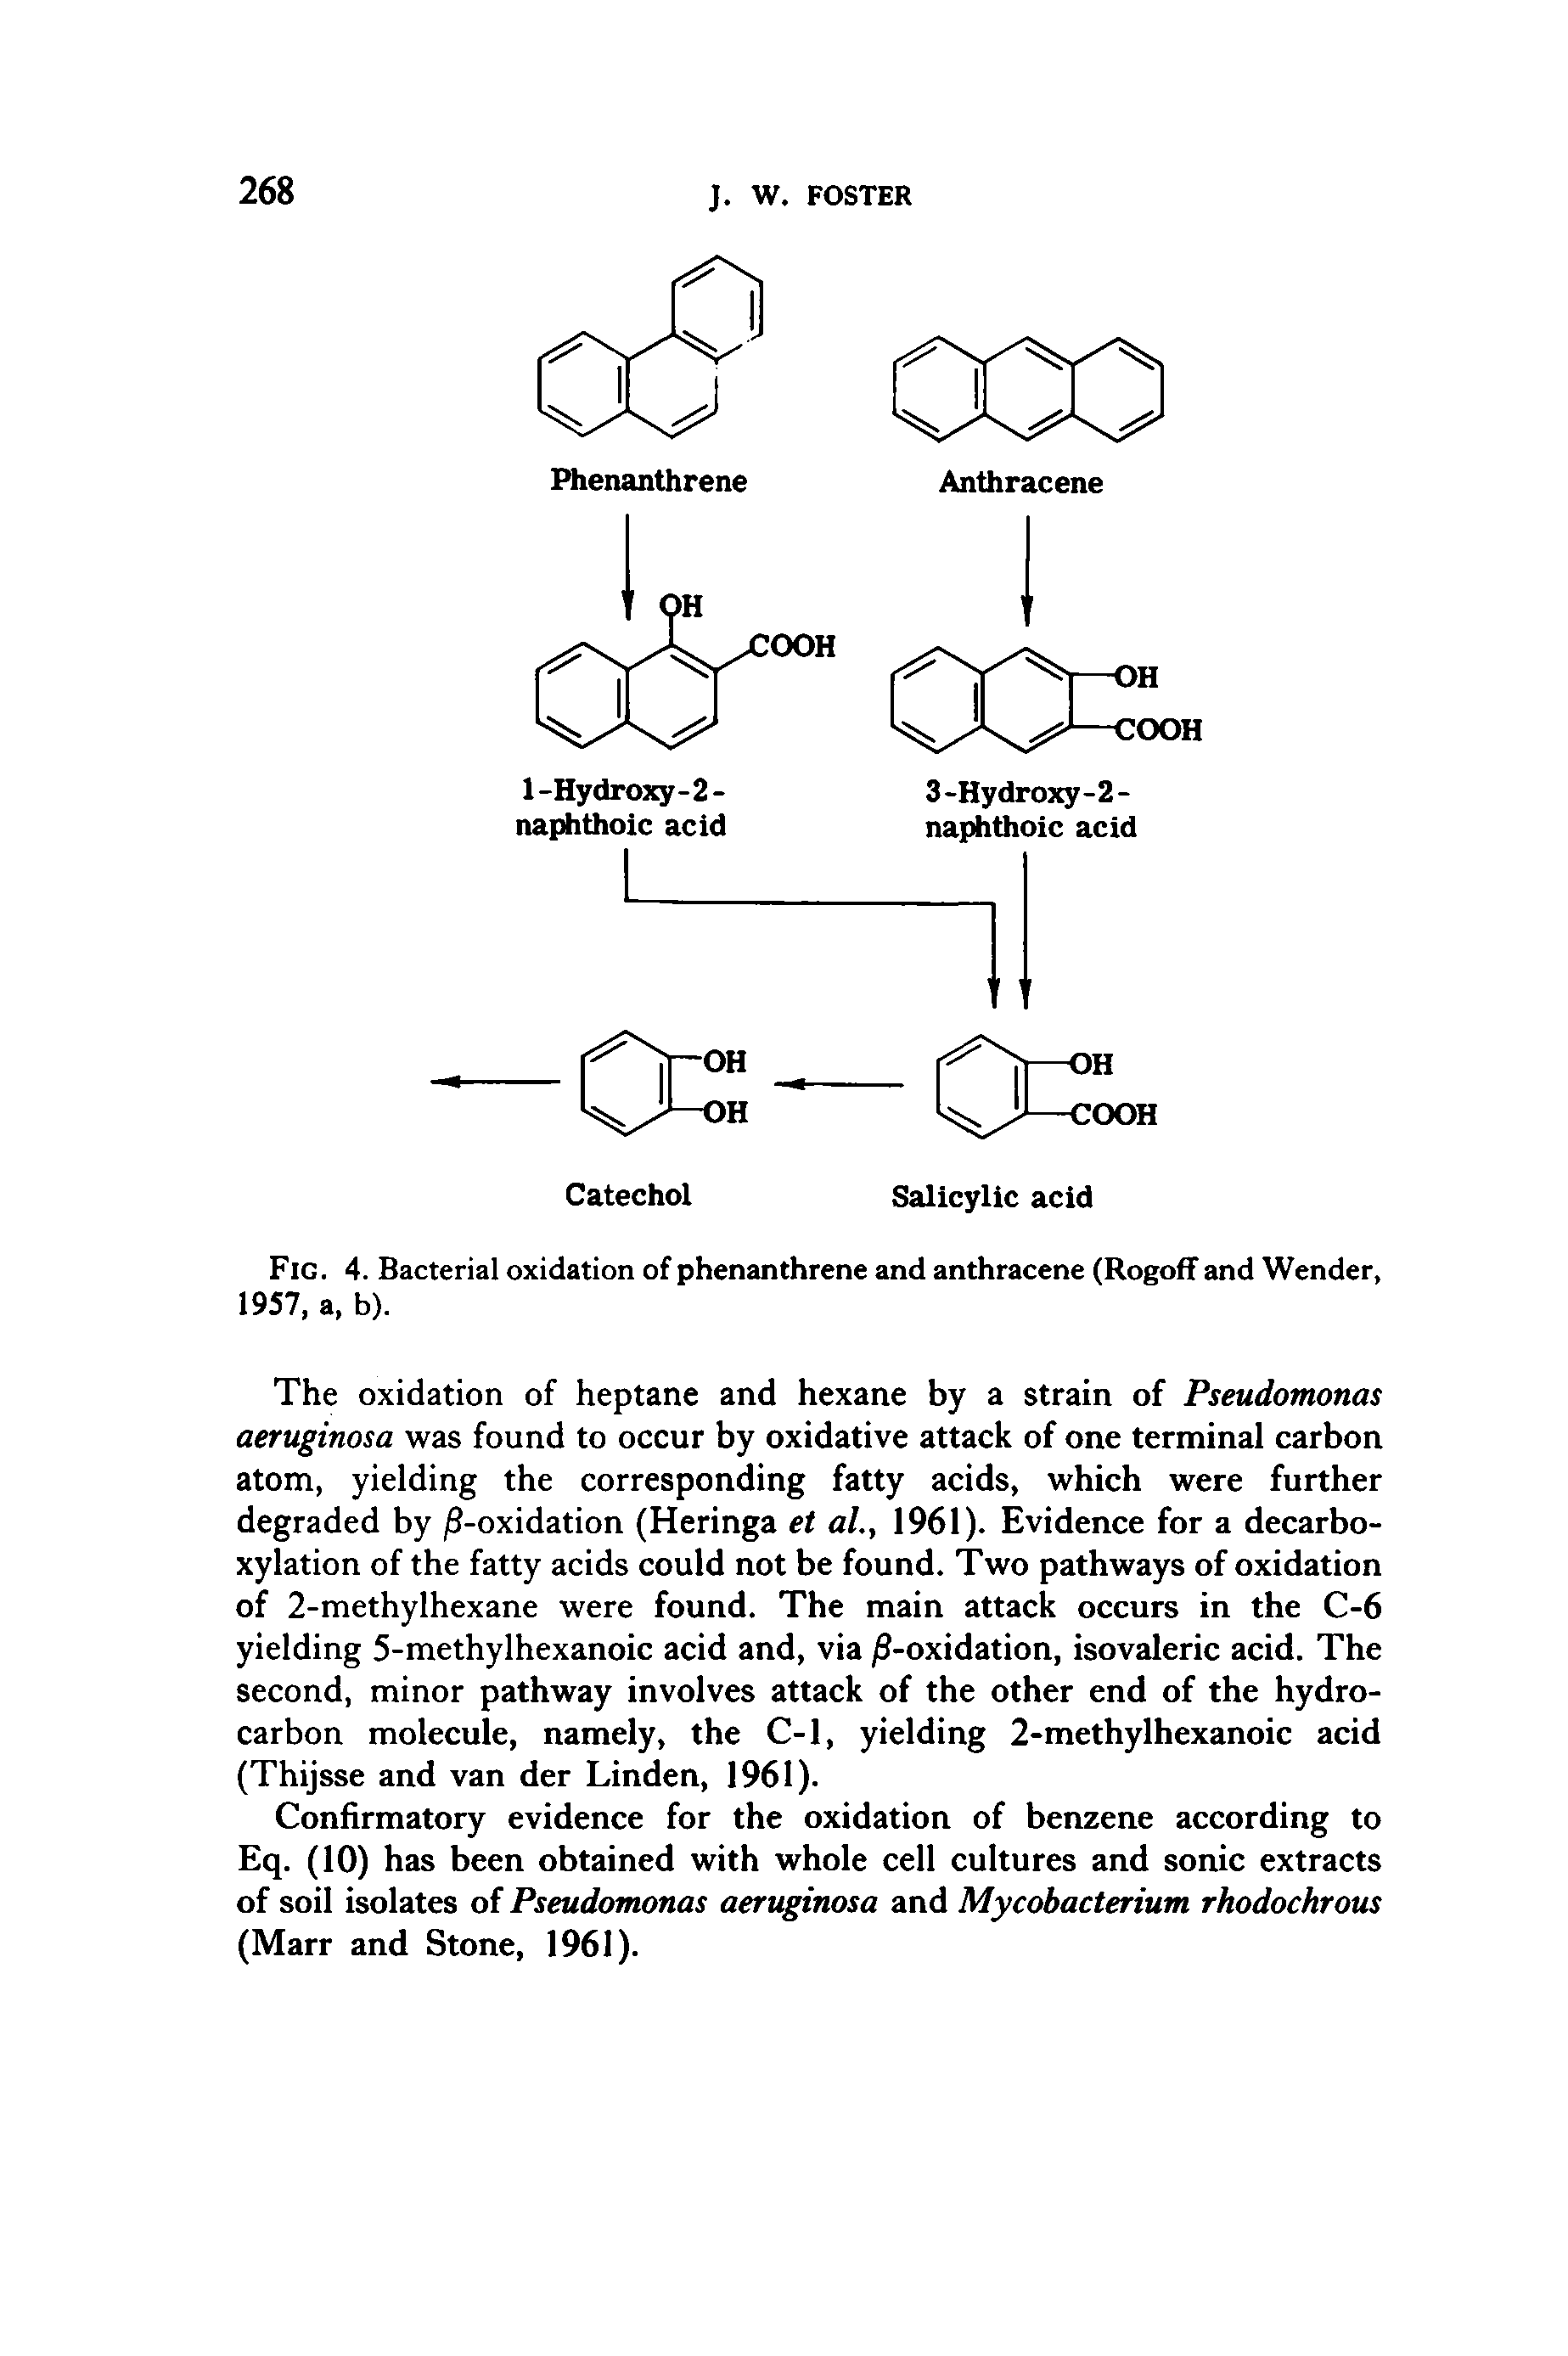 Fig. 4. Bacterial oxidation of phenanthrene and anthracene (RogofF and Wender, 1957, a, b).